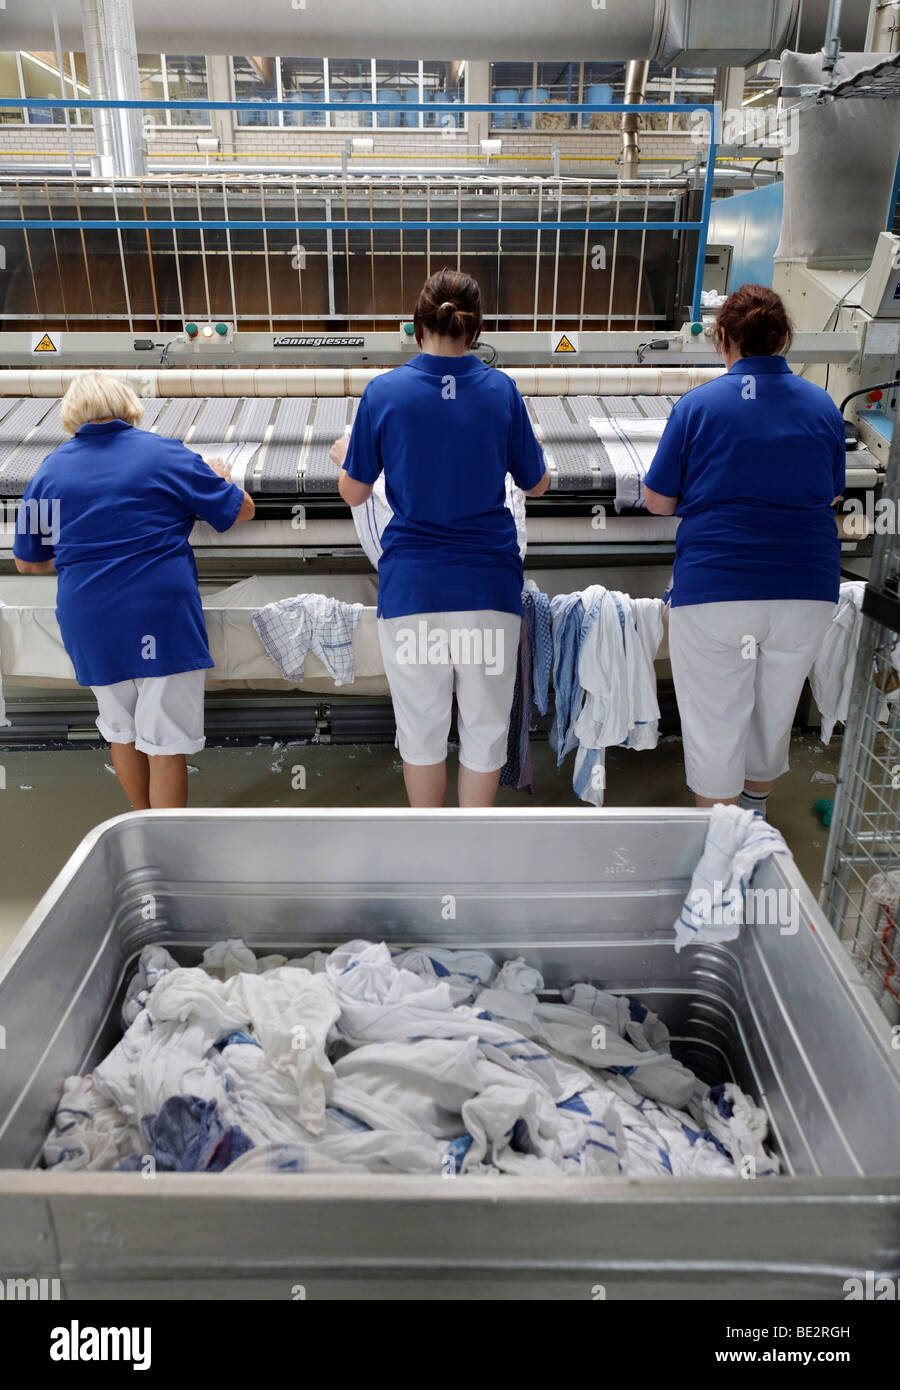 In the mangle room, from right to left, Nicole Haberstich, Amelie Mariechal and Luise Amm placing handtowels in an industrial m Stock Photo